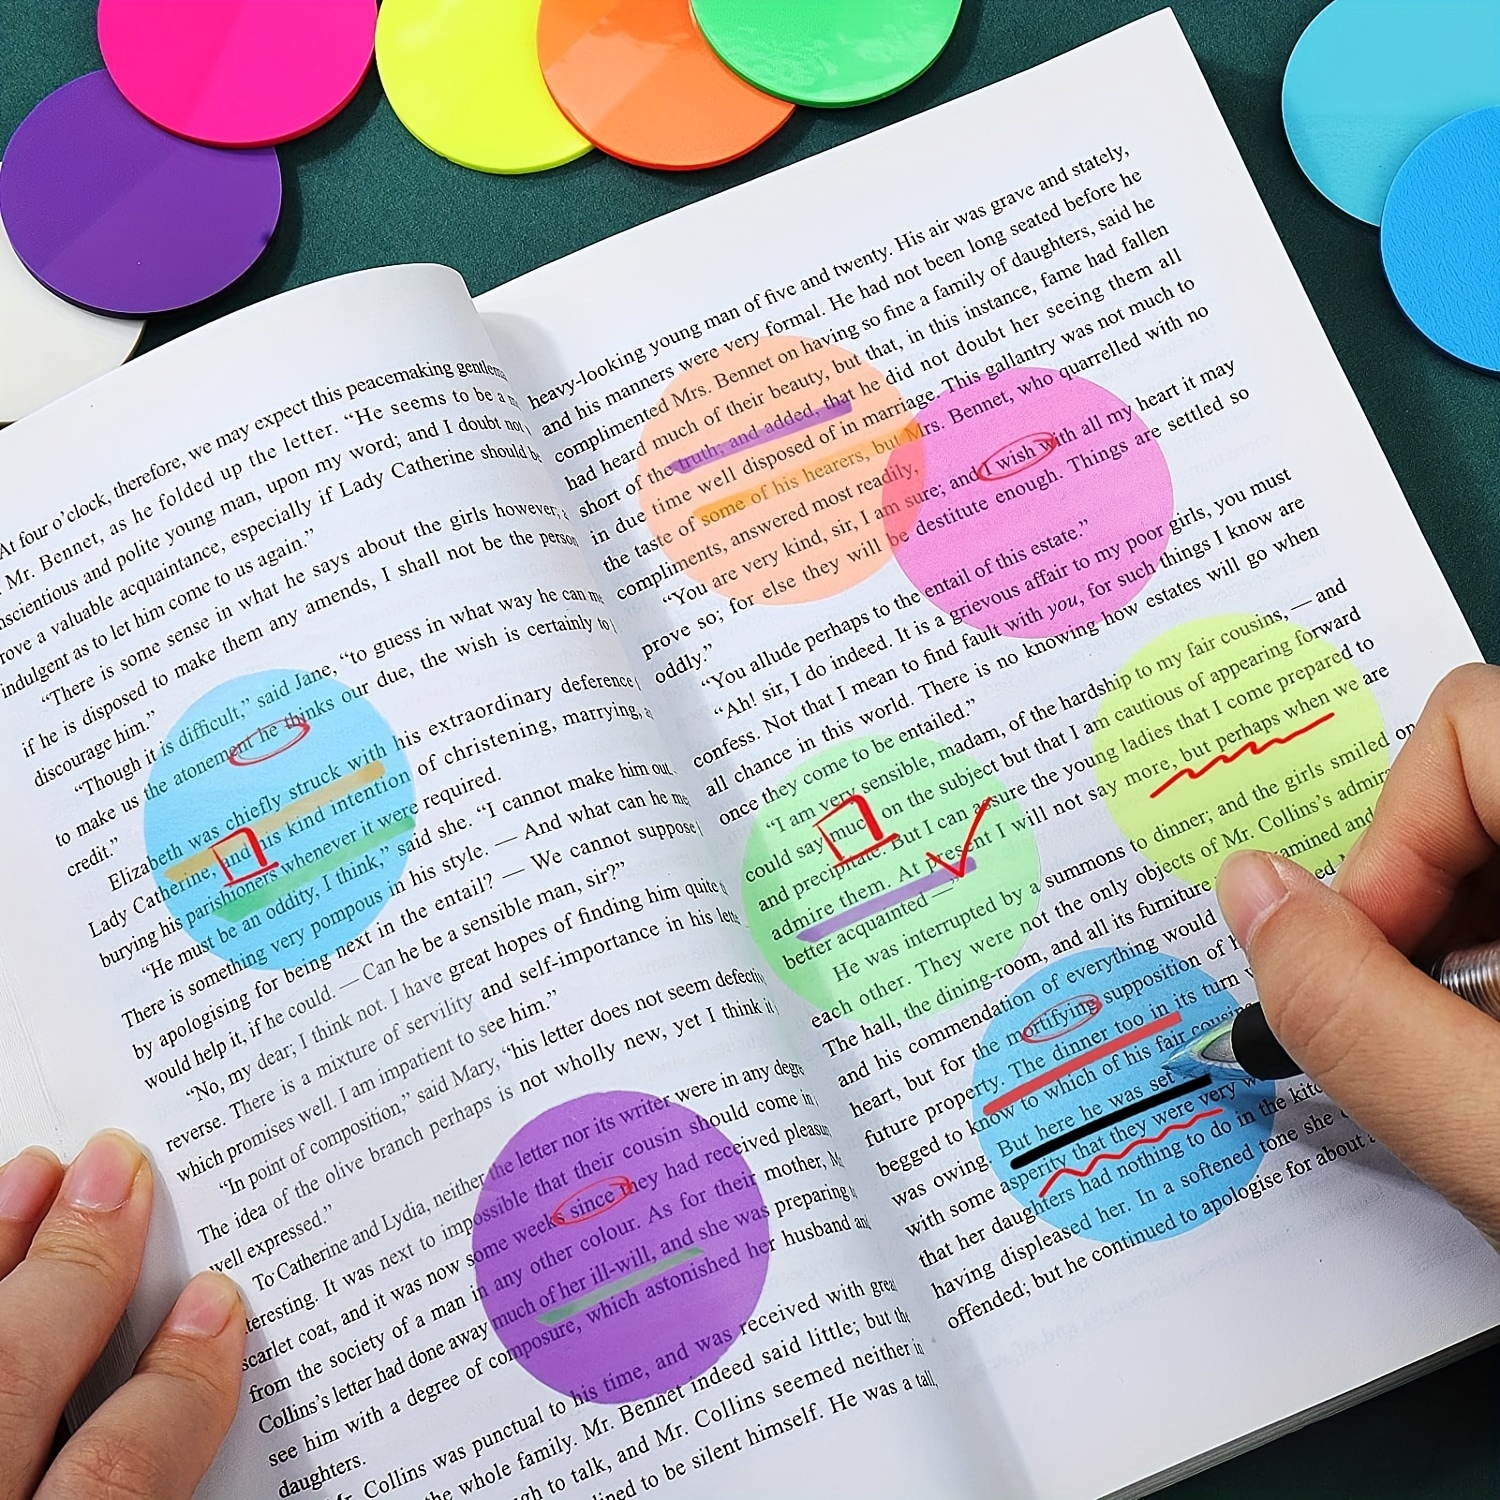 Transparent Sticky Note Tabs for Books, 200 PCS Vintage Clear Waterproof  Self-Adhesive Translucent Colorful Sticky Index Tabs for Annotating Books